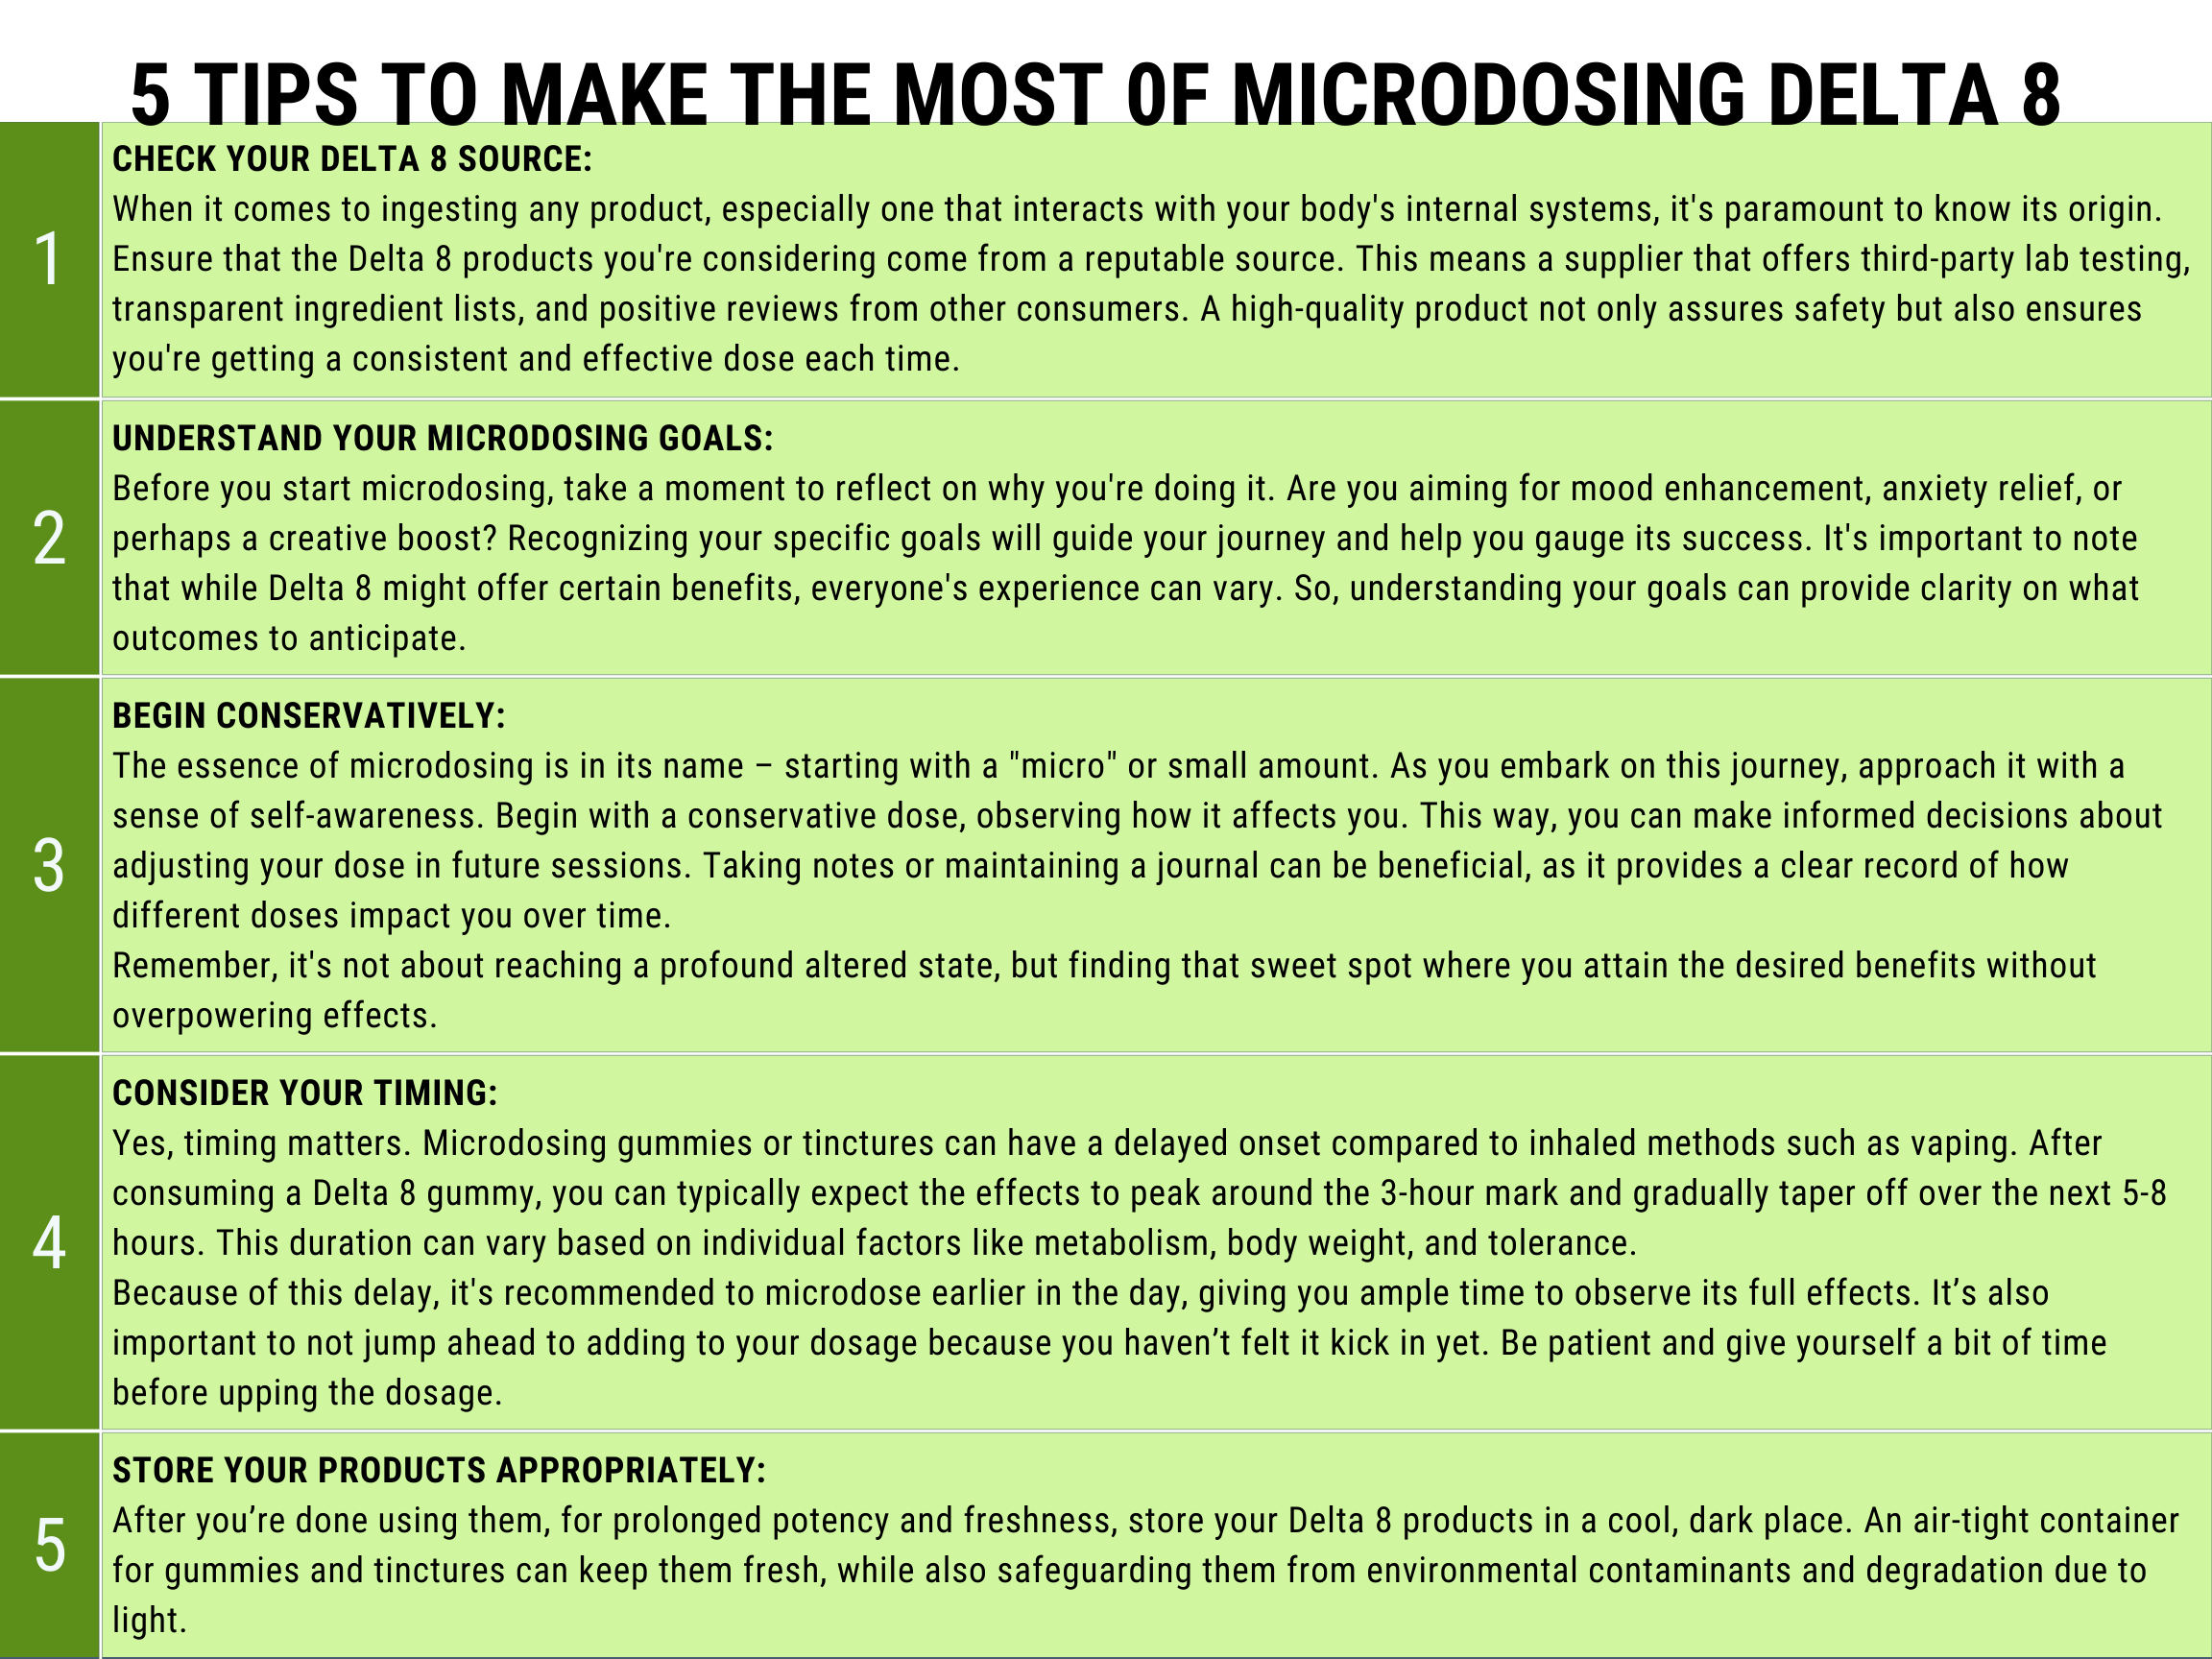 Table with 5 tips for microdosing delta 8 